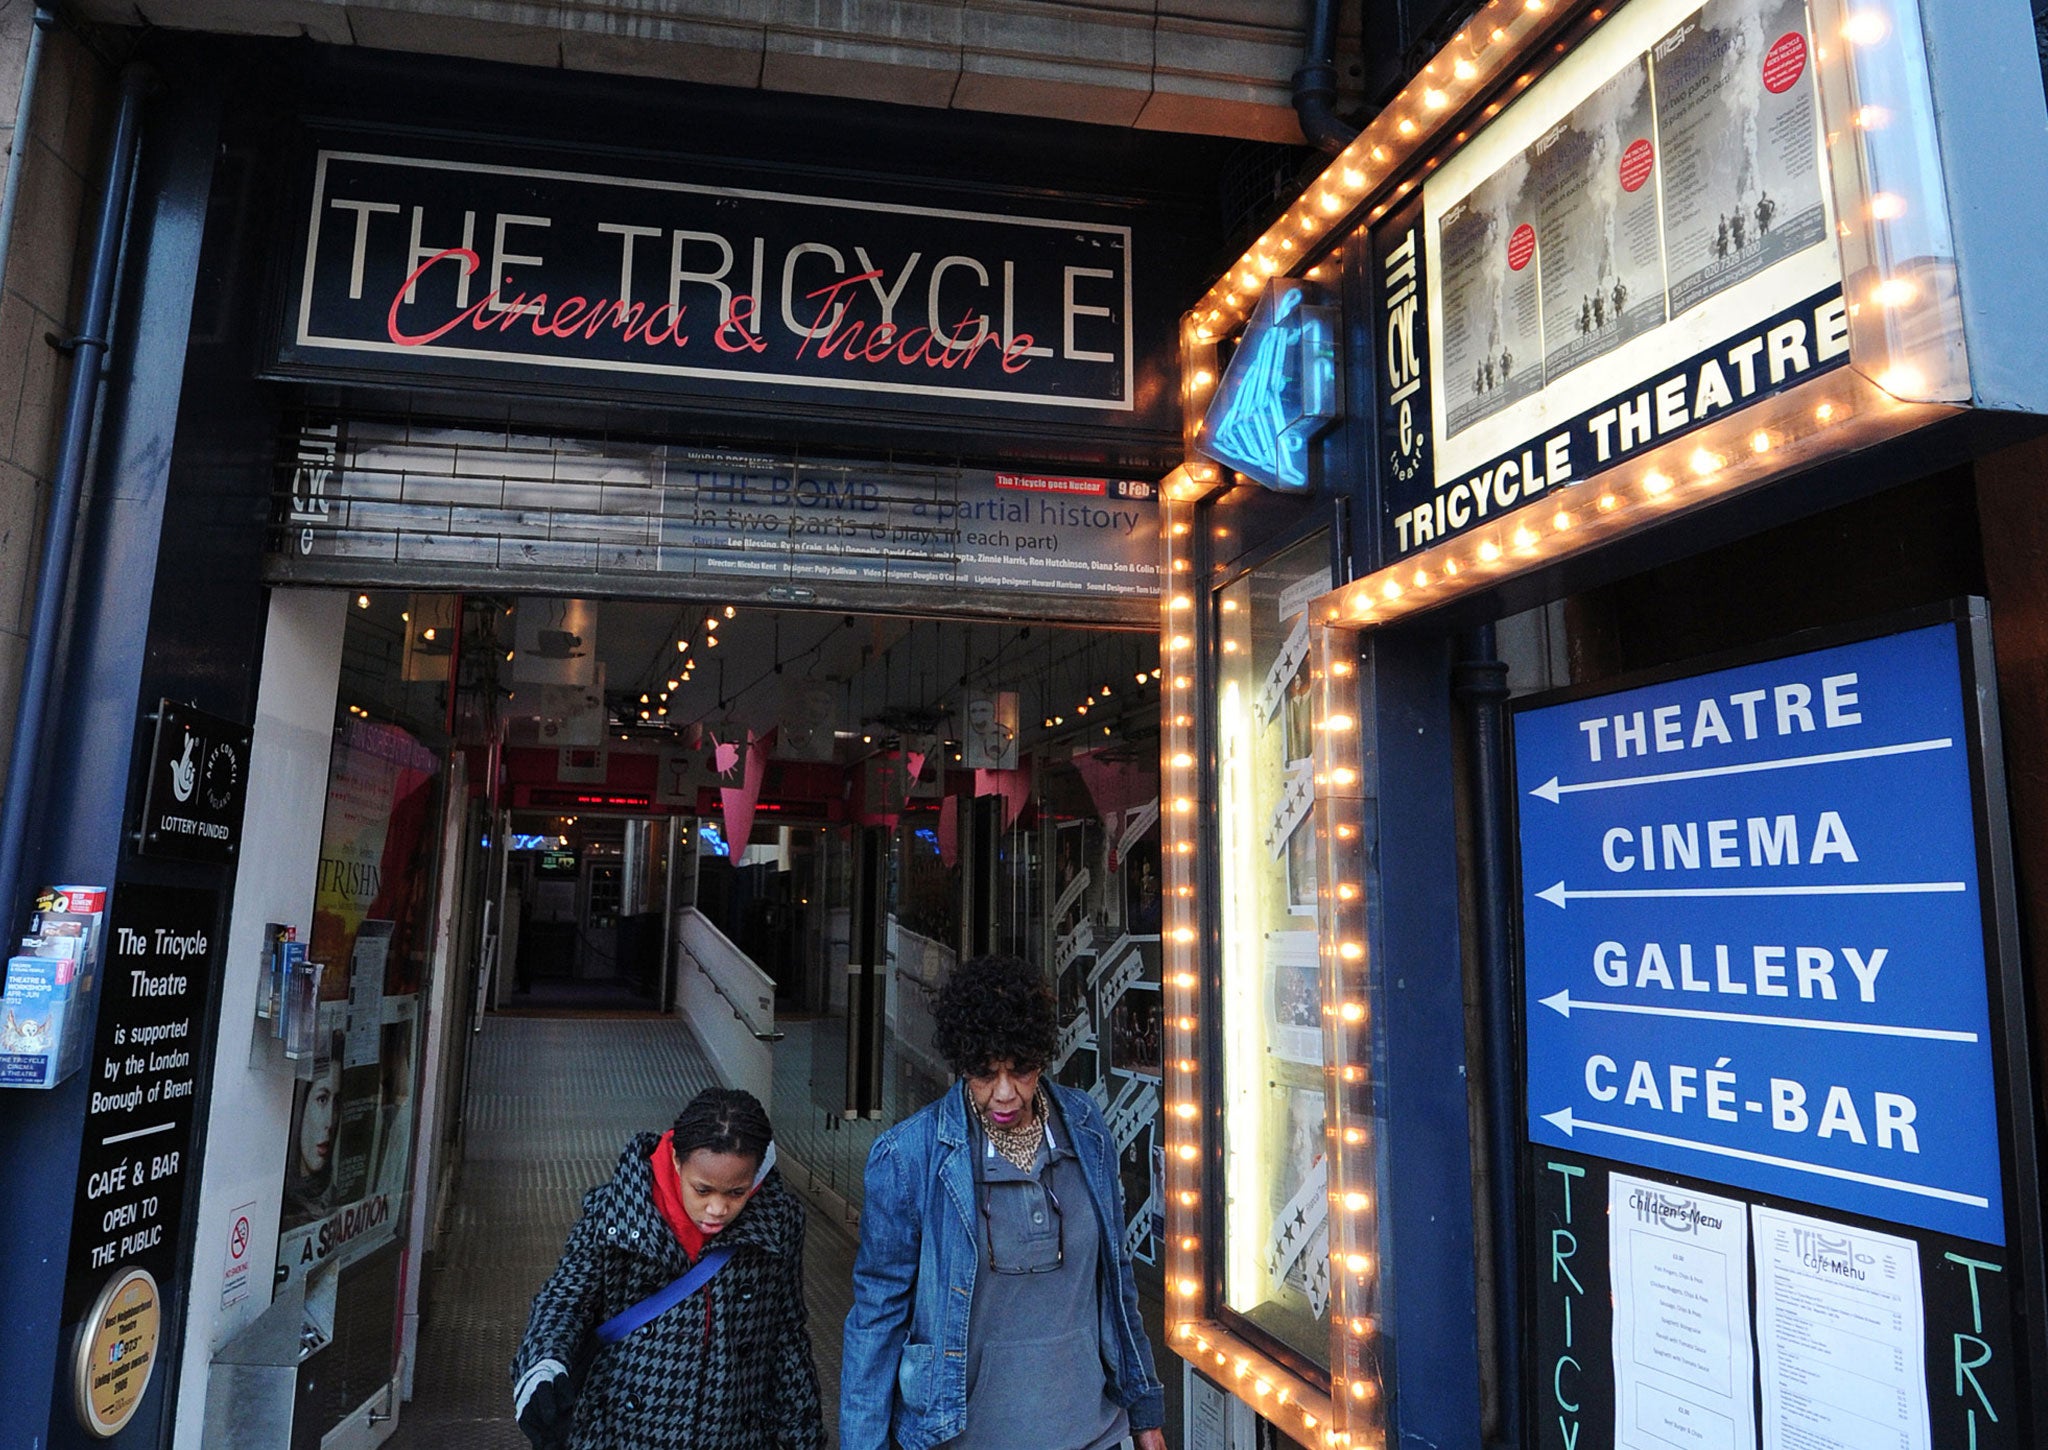 People walk through the entrance of the Tricycle Theatre in north London